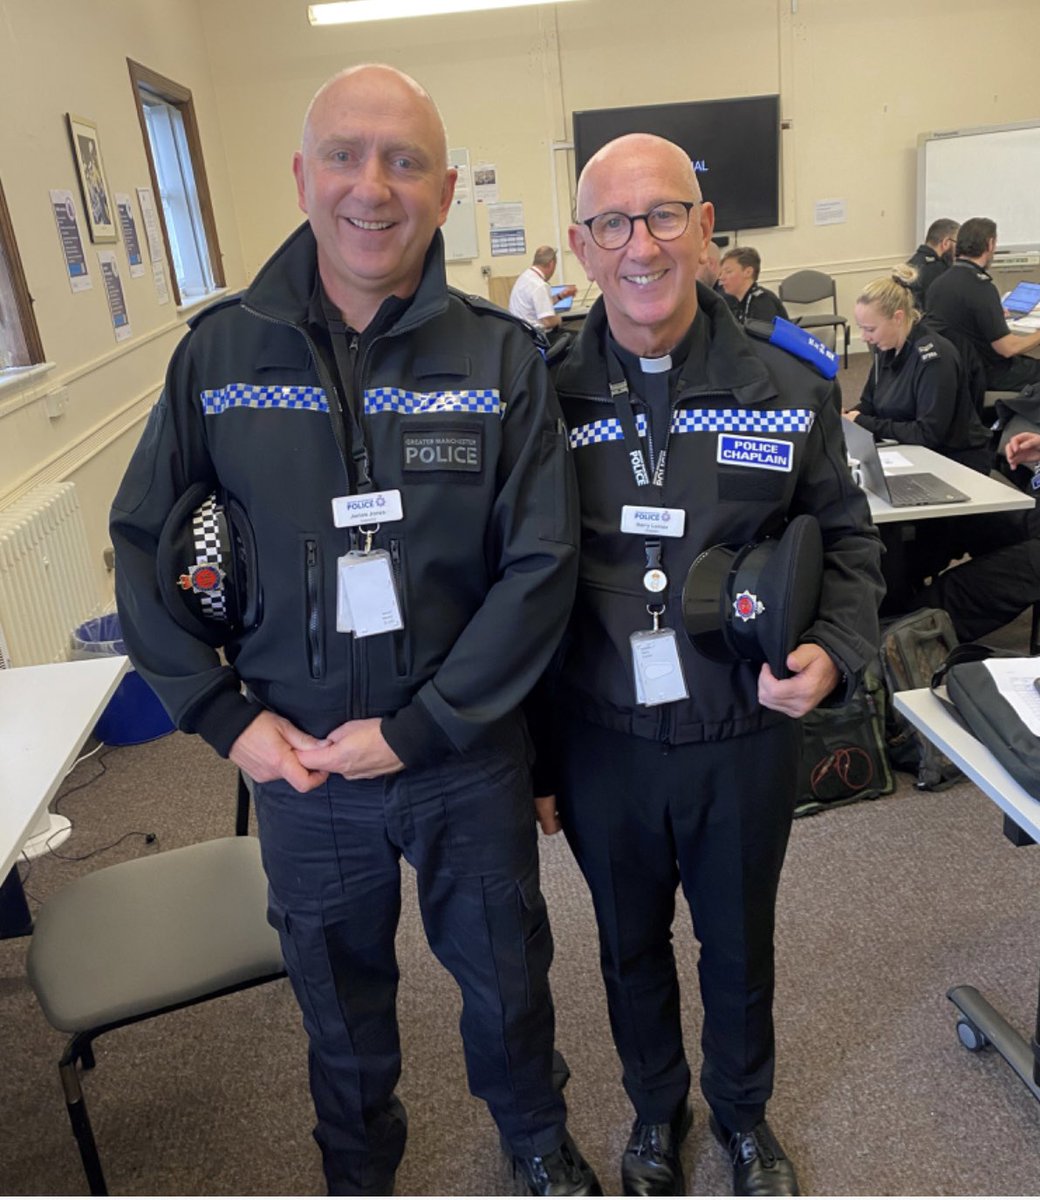 It was great to bump into @barry0358 at @gmpolice Sedgley Park training college yesterday. Such a positive influence on everyone, he even sits on our Supporting Our Armed Forces steering group. Thanks for all you do Father.